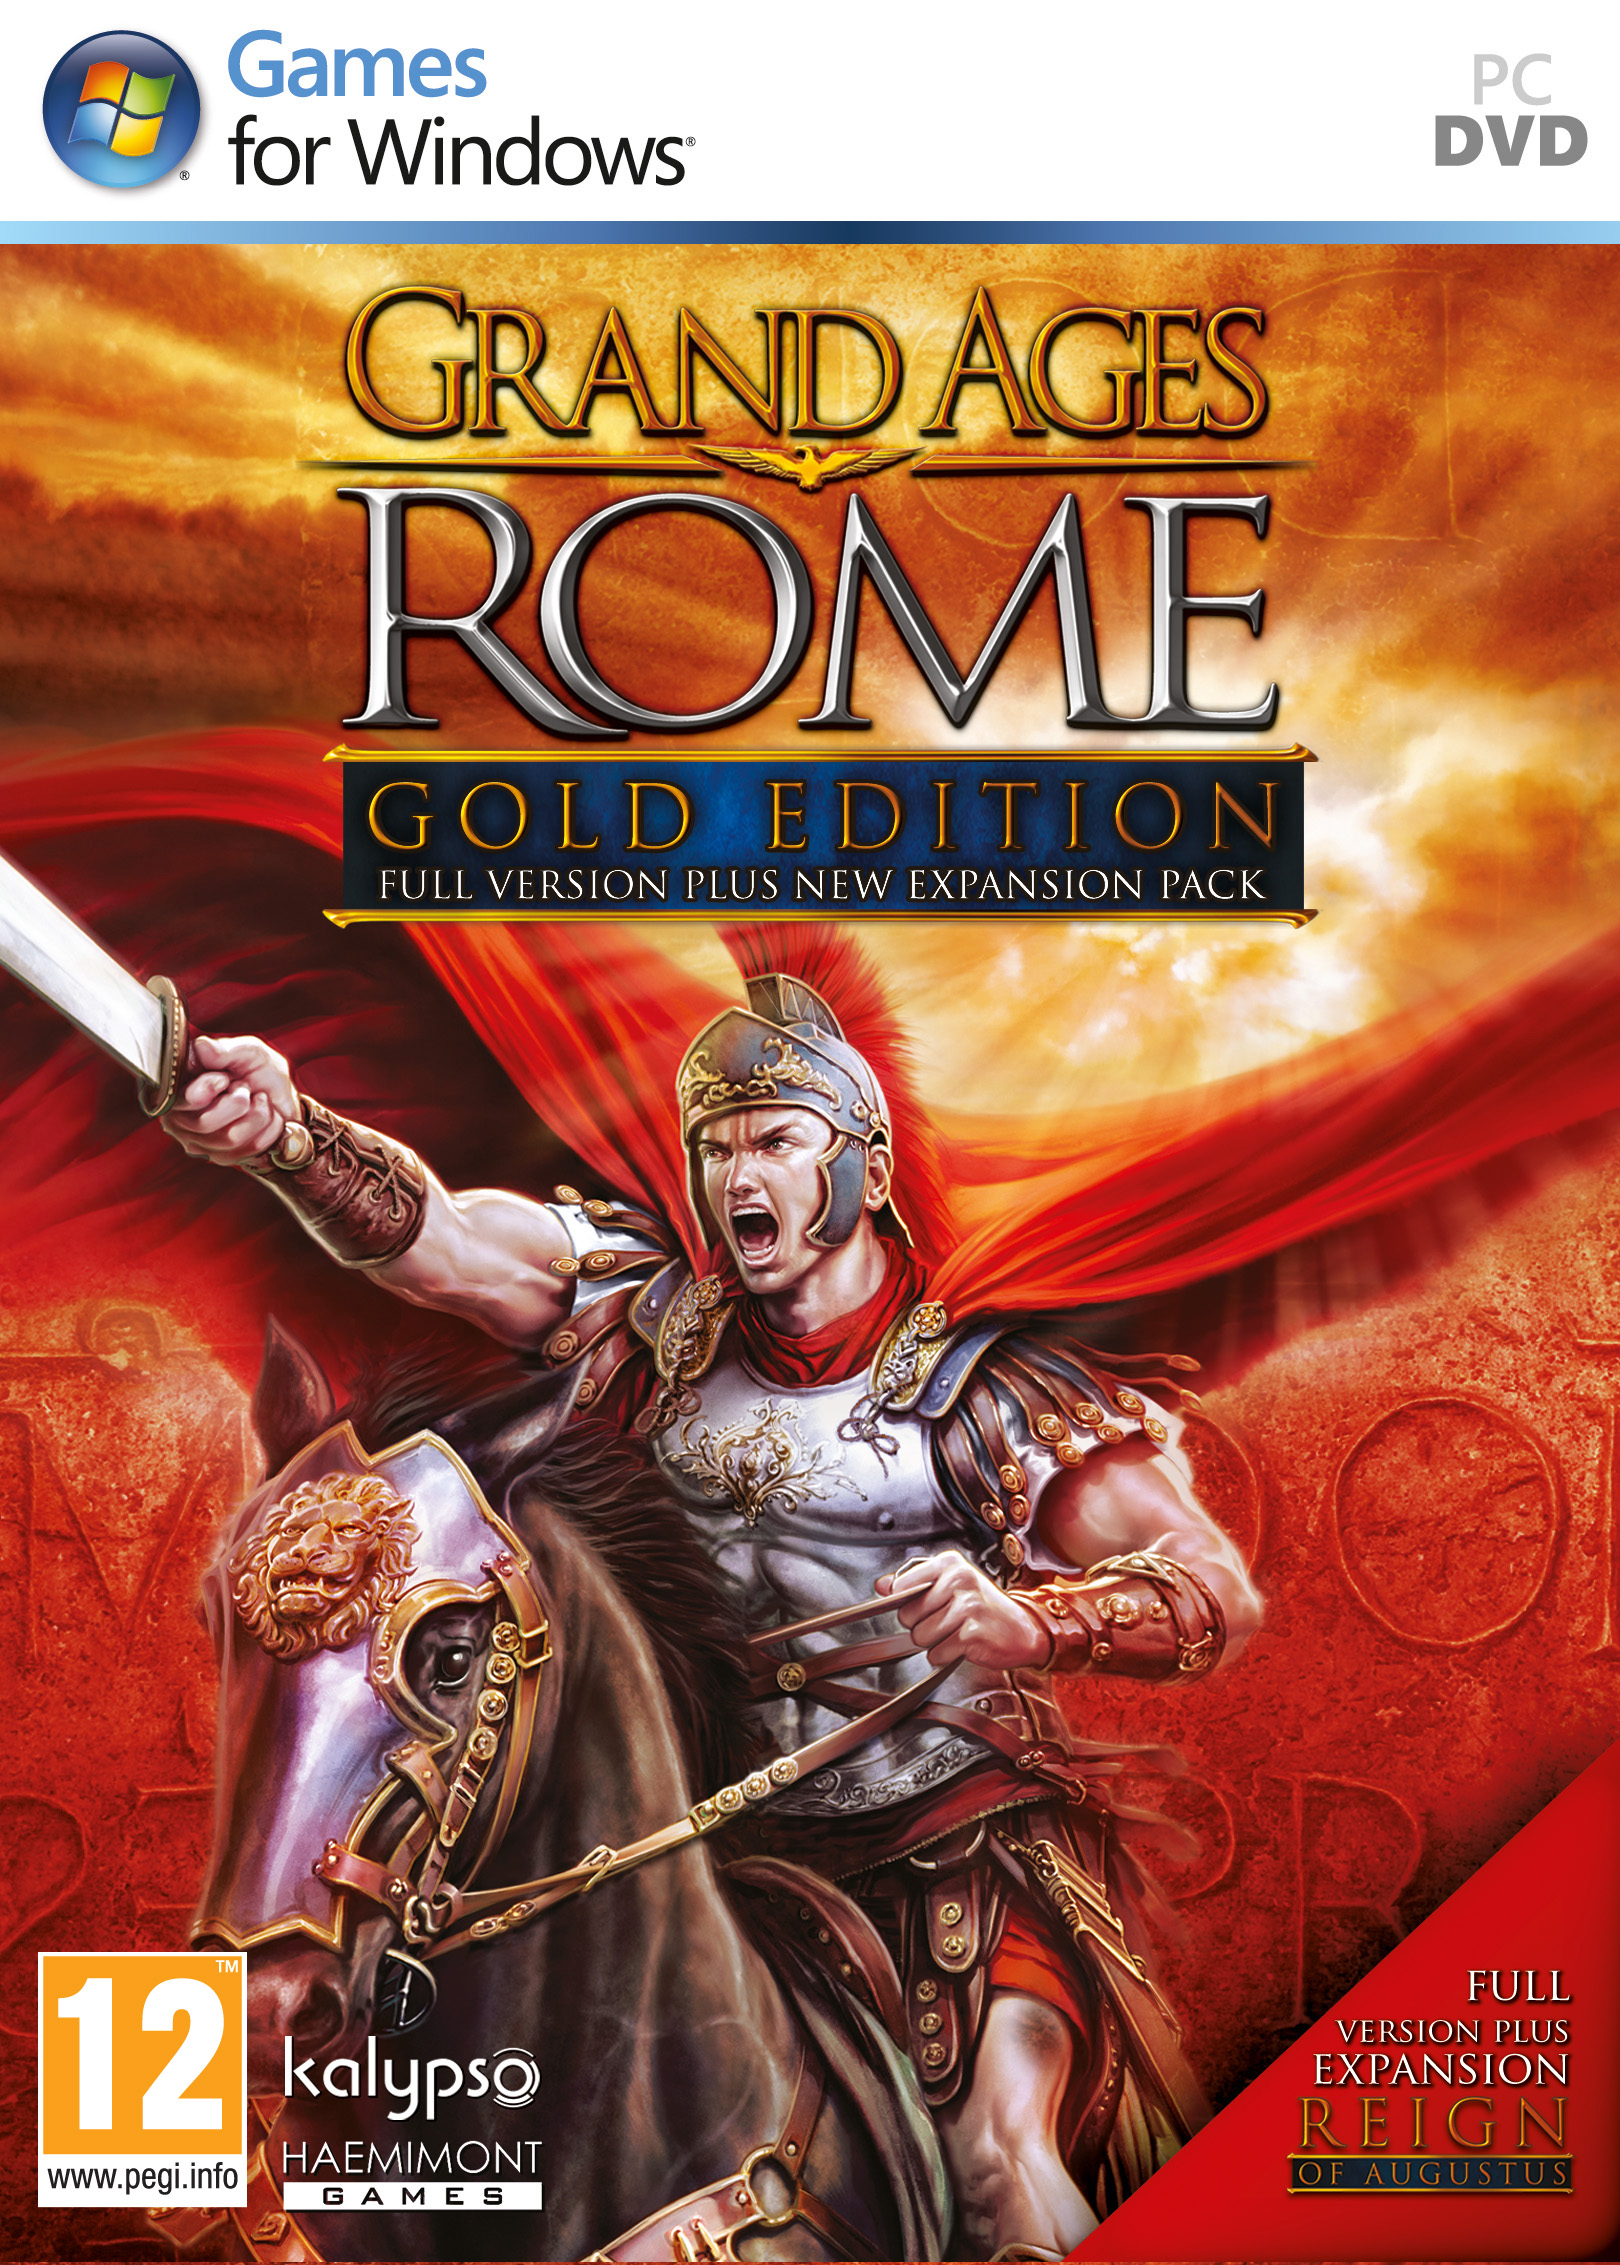 Grand Ages: Rome - Gold